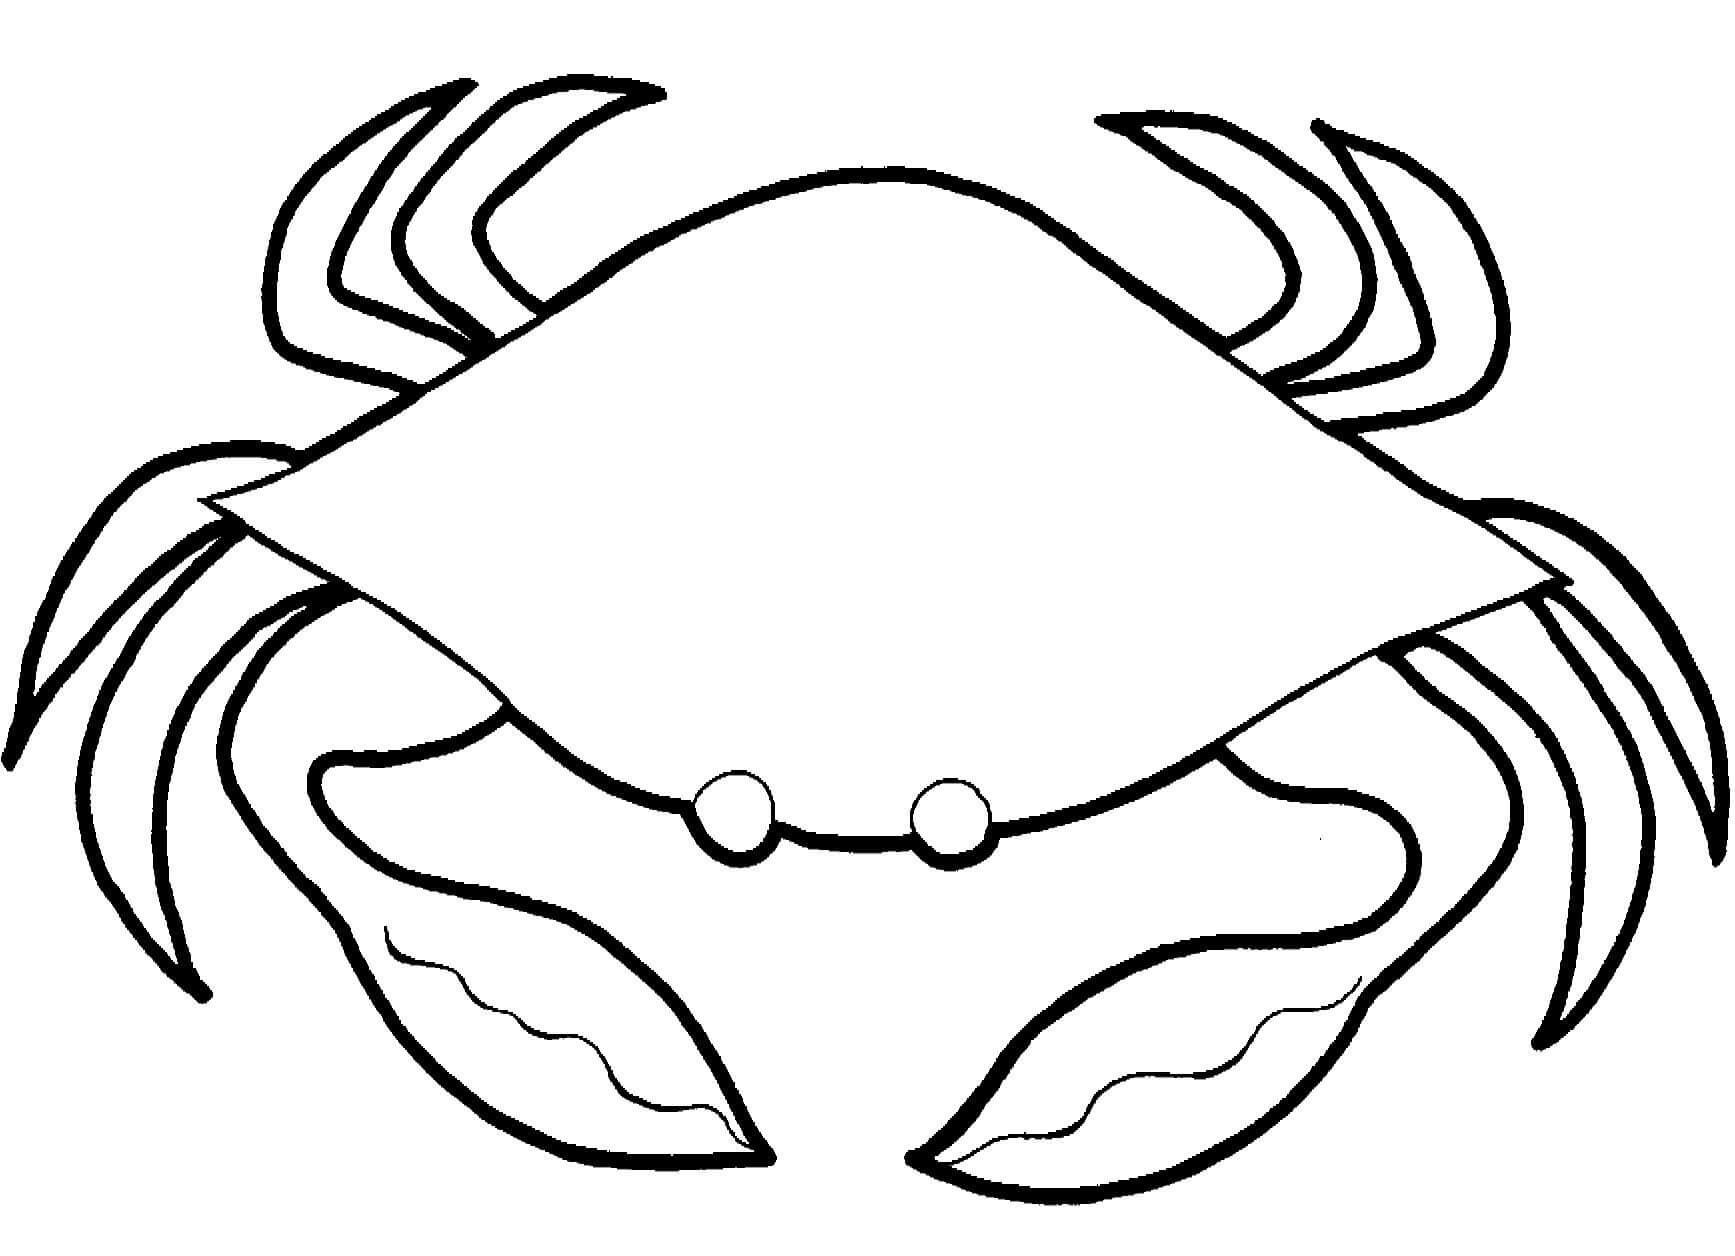 Crab 1 Coloring Page